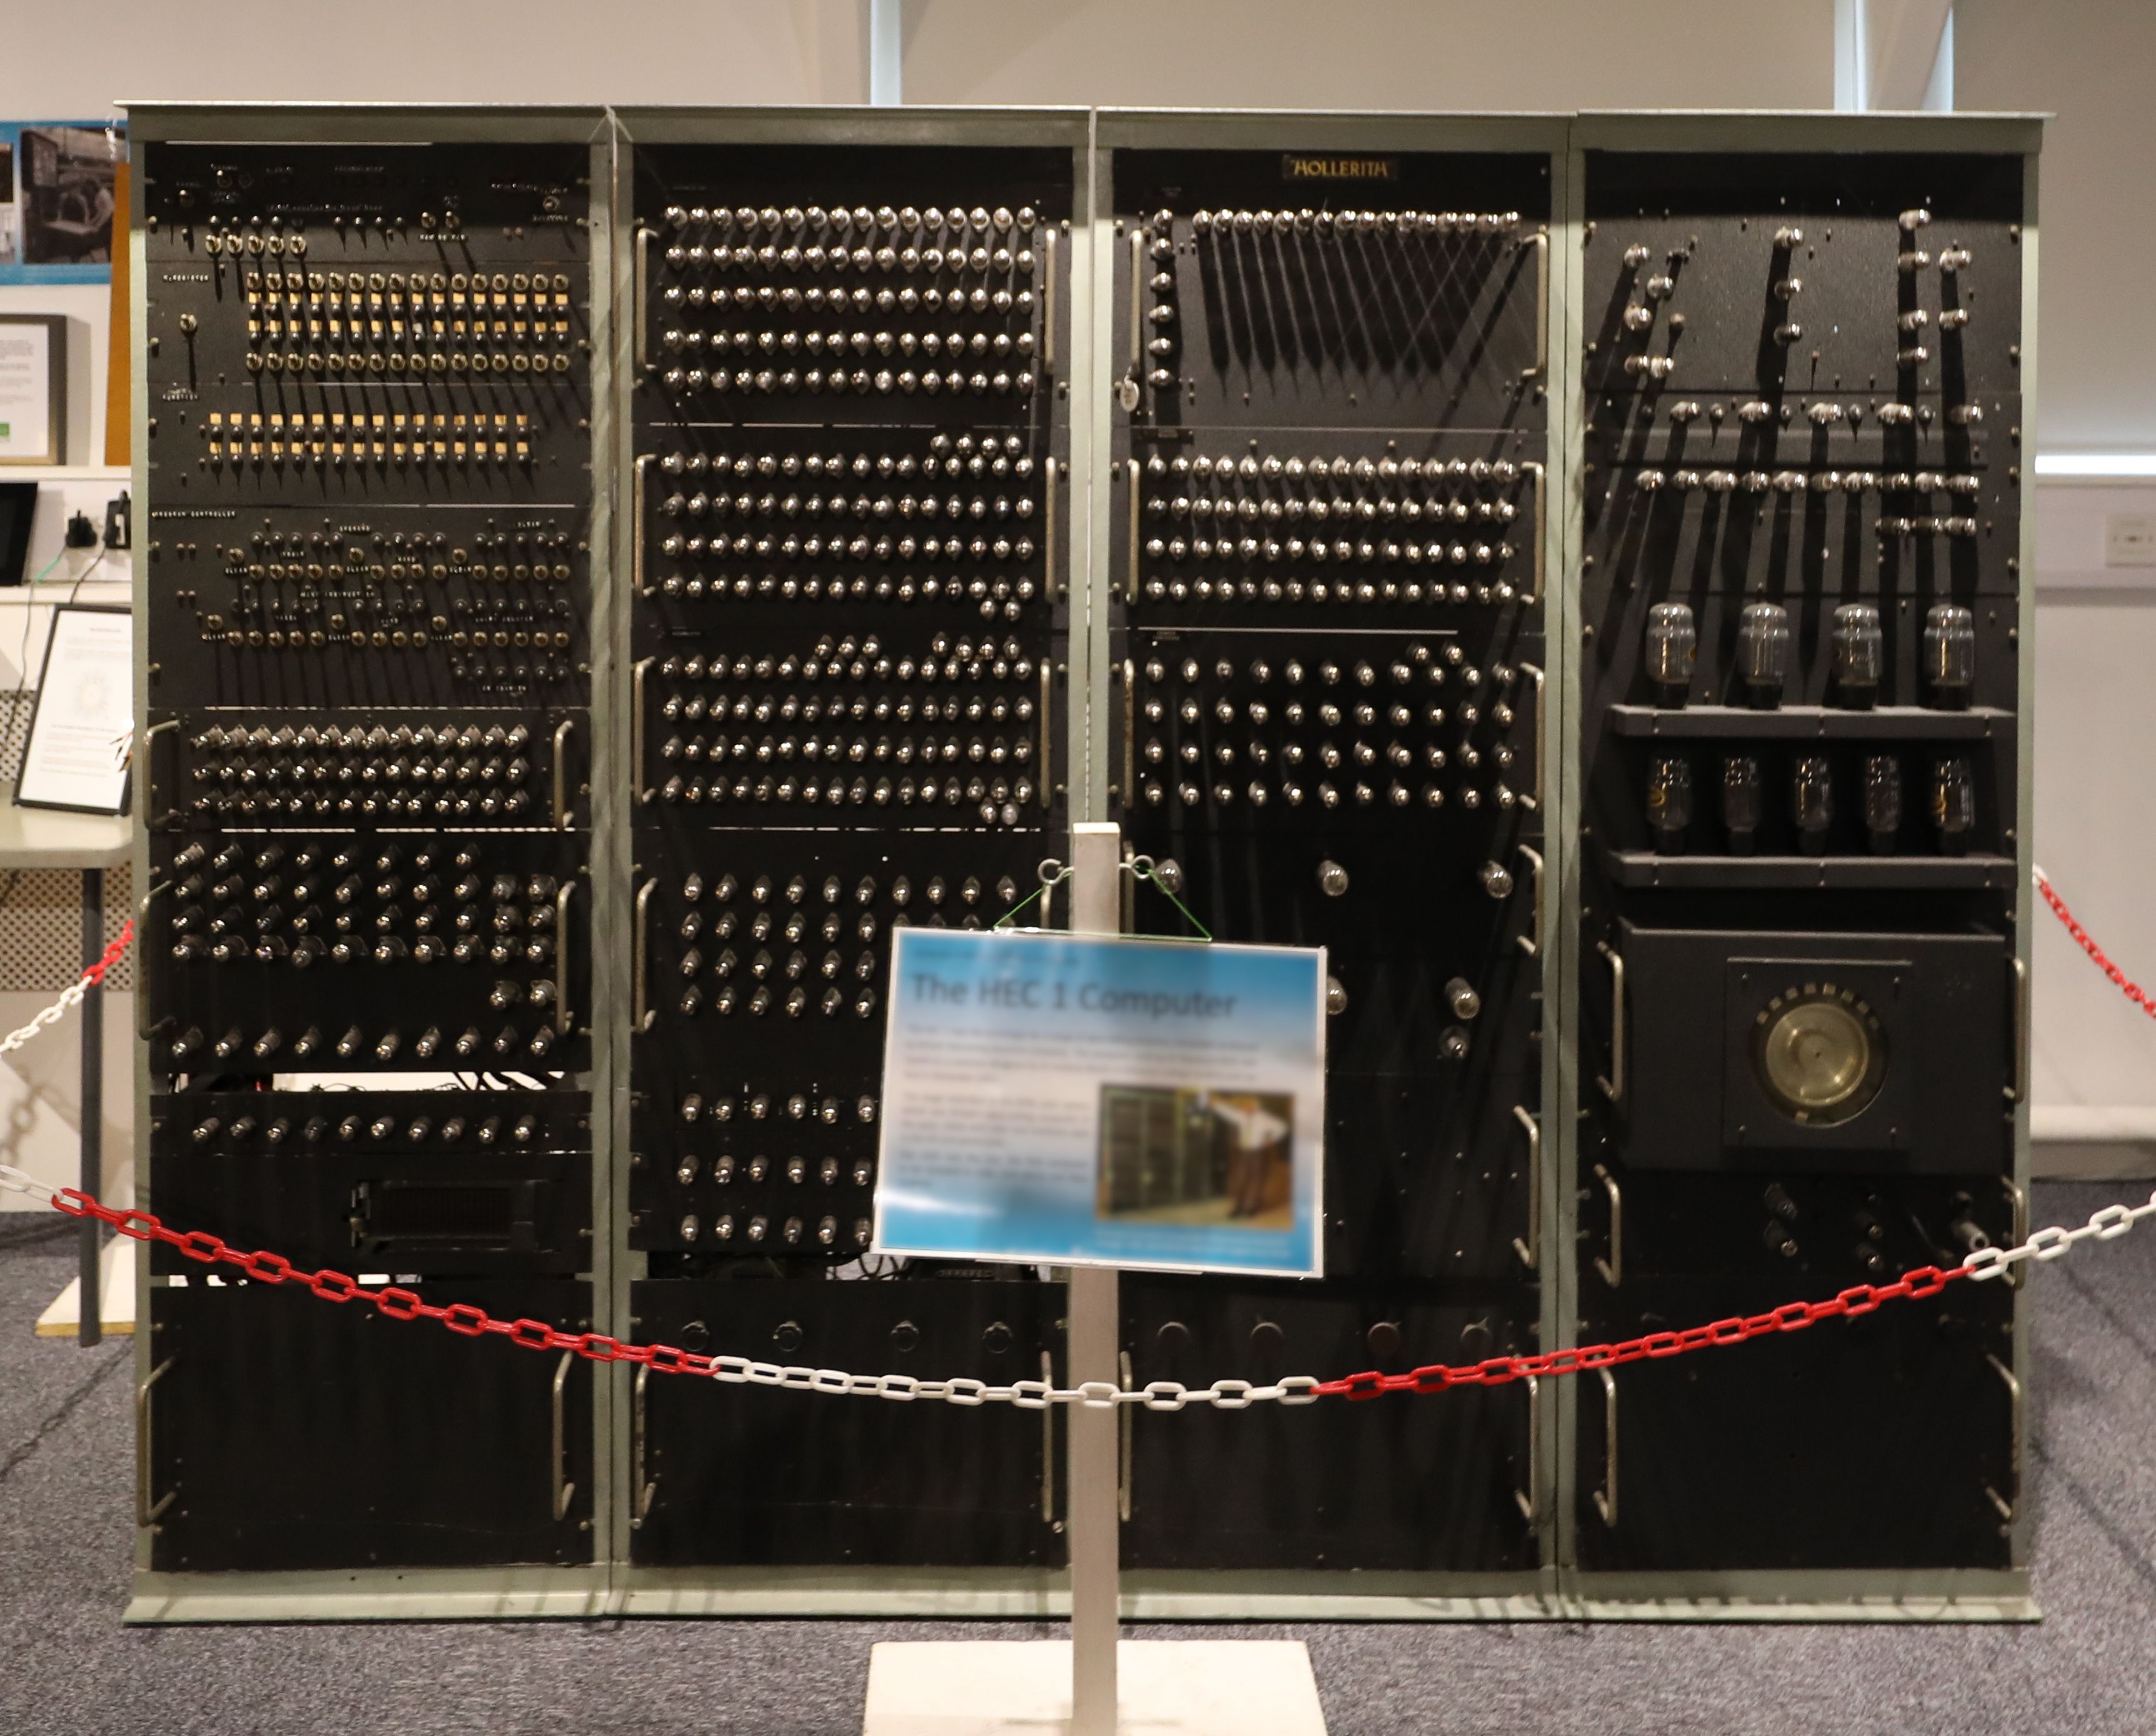 The First Digital Electronic Computer